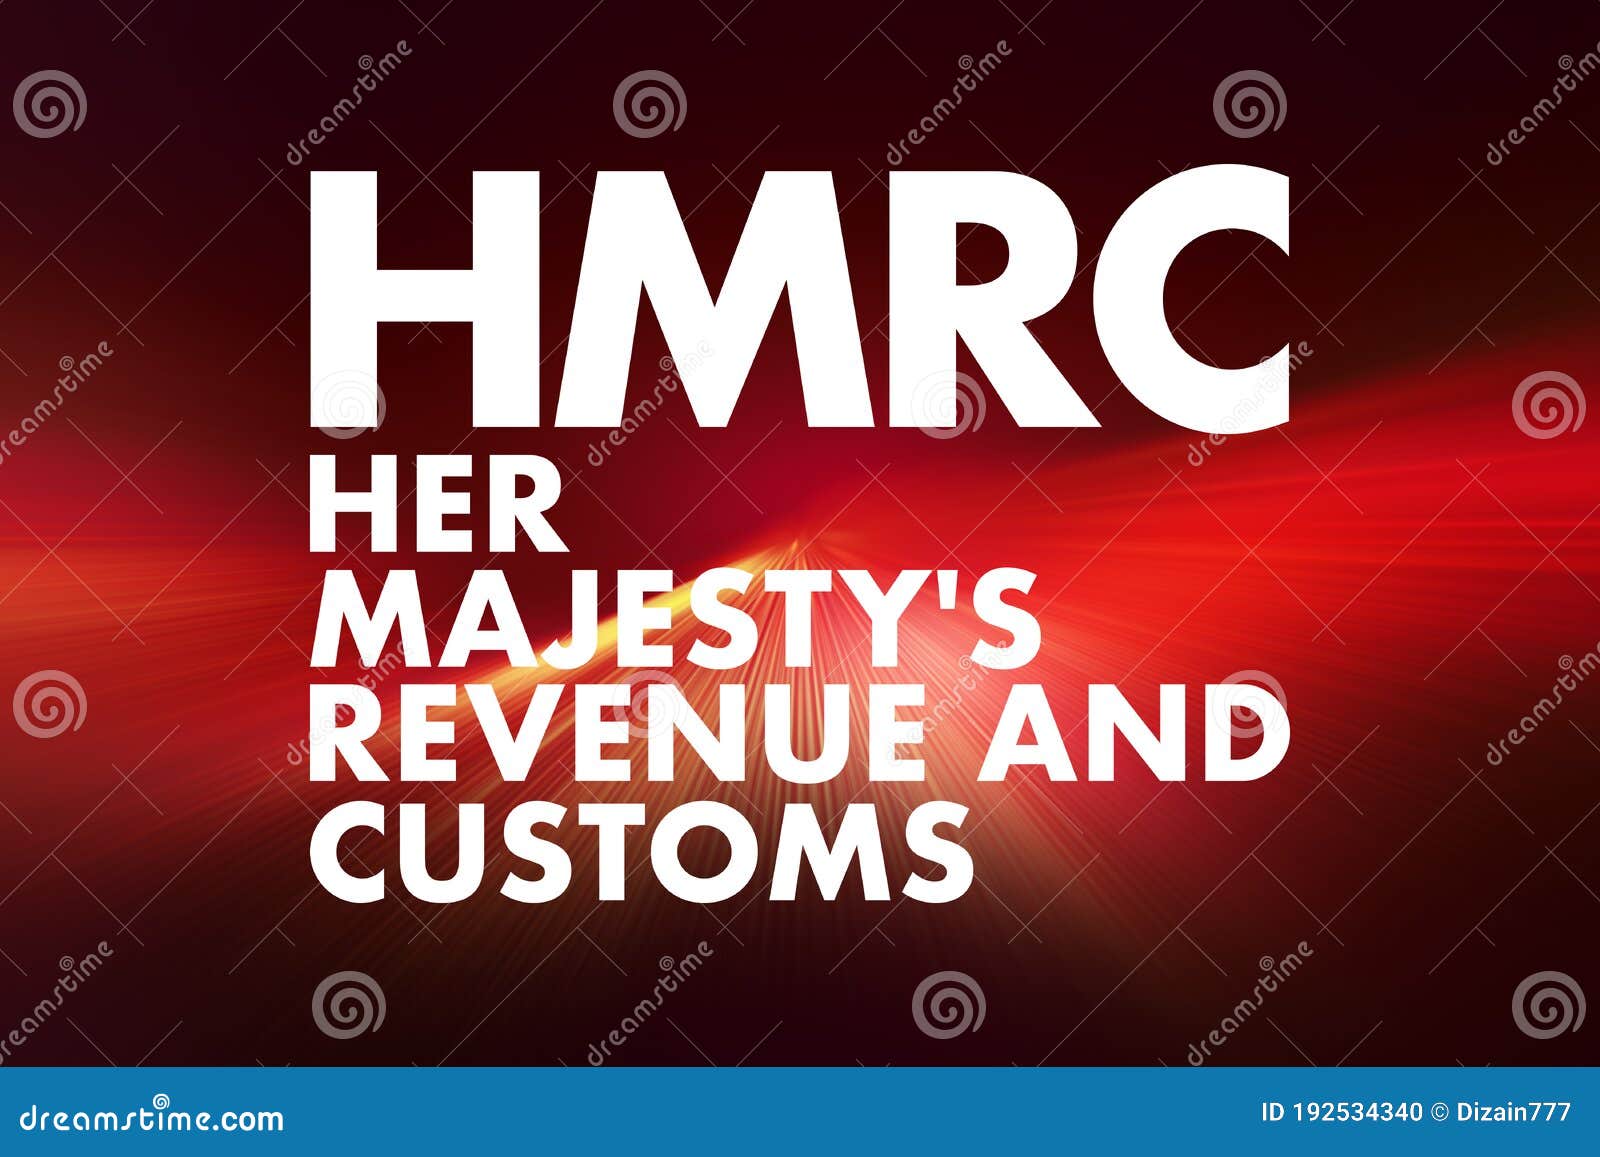 Hmrc Her Majesty S Revenue And Customs Acronym Business Concept Background Editorial Image Illustration Of Definition Revenue